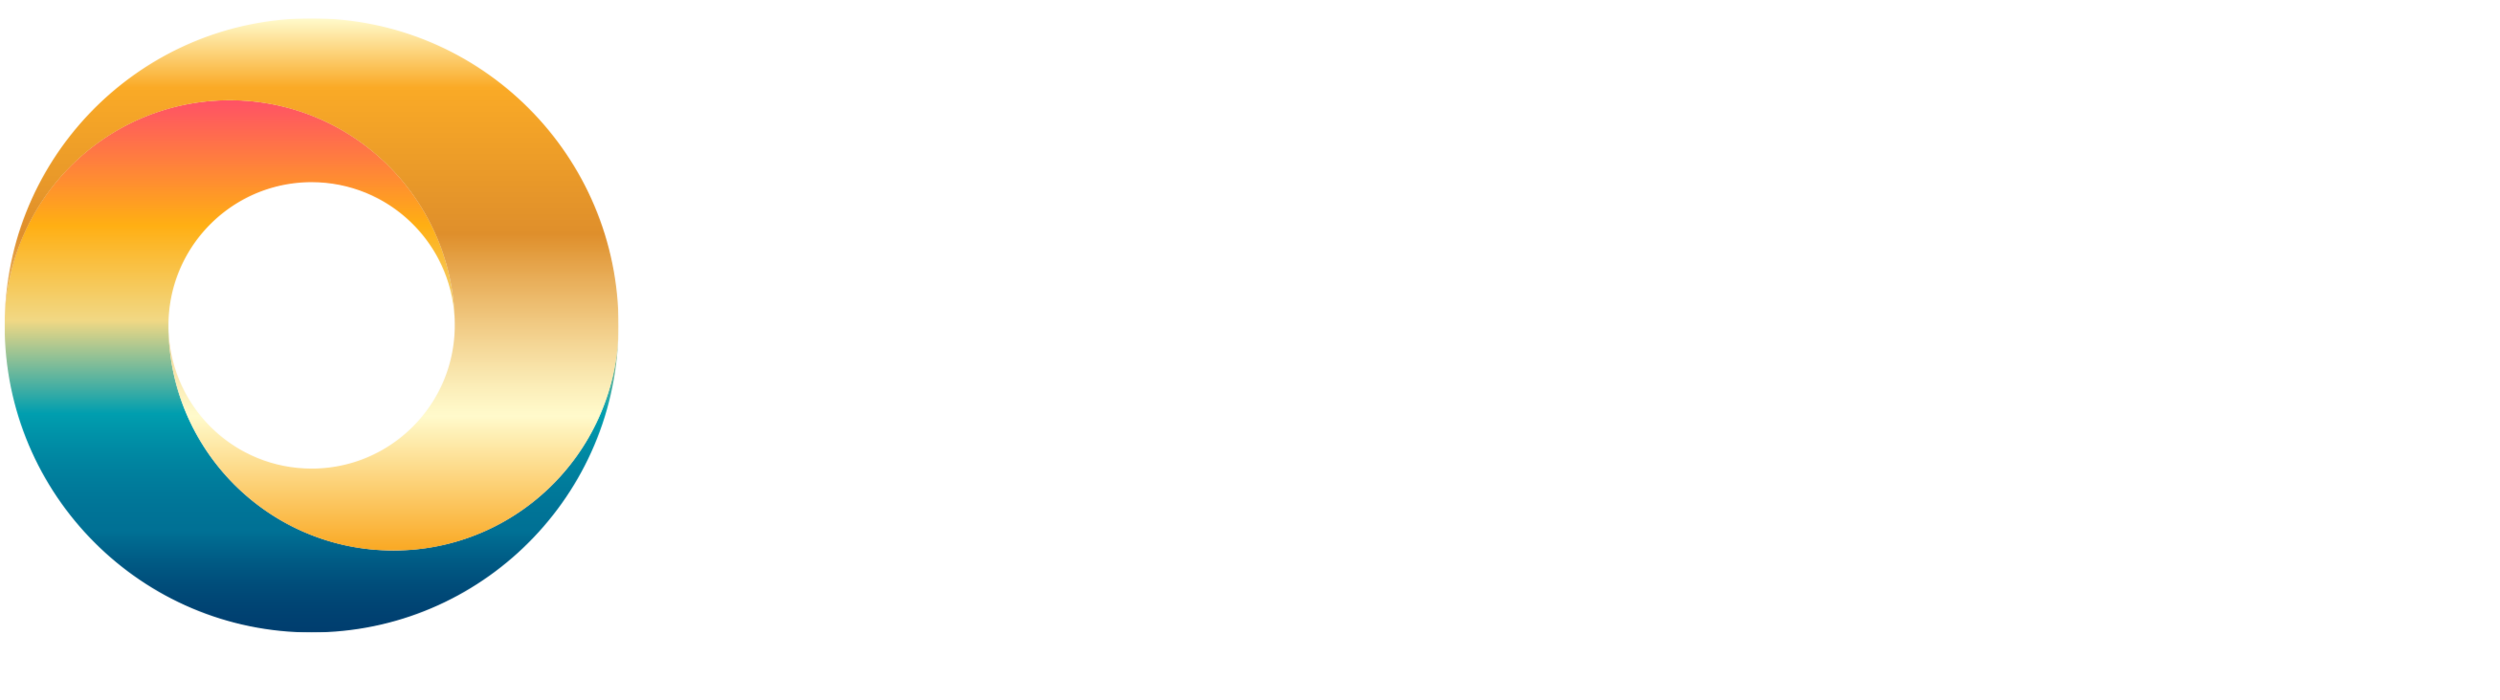 The San Francisco Marriage and Couples Center